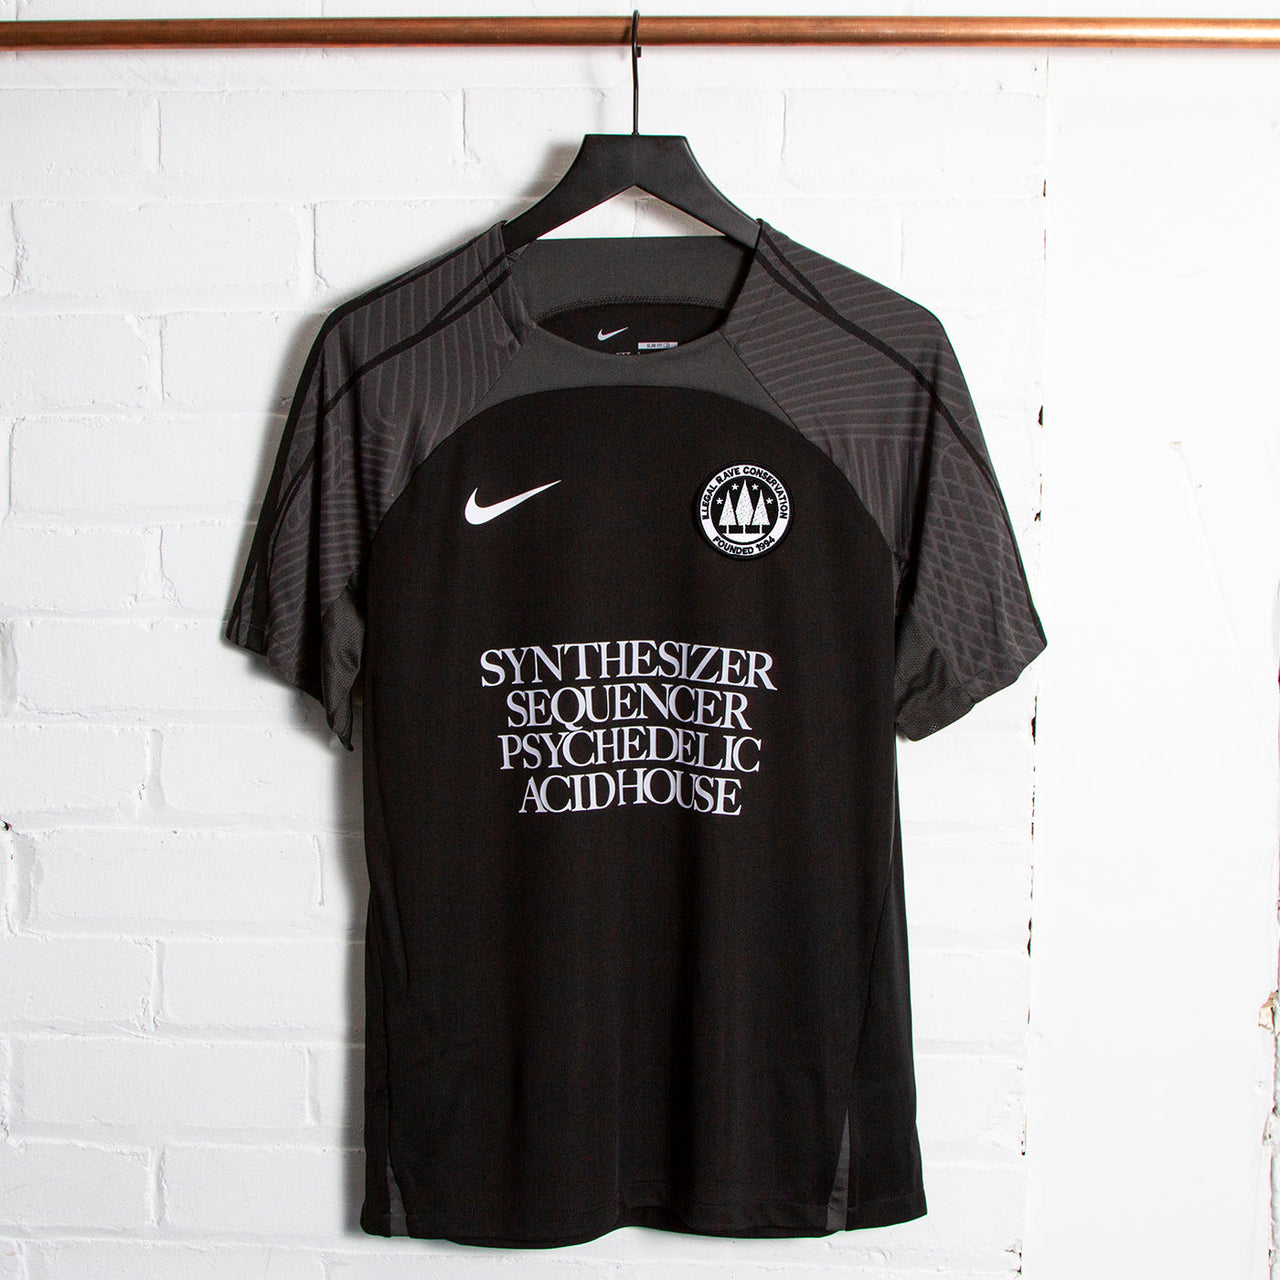 Wasted Heroes FC Strike 3 - Football Jersey - Black Rave